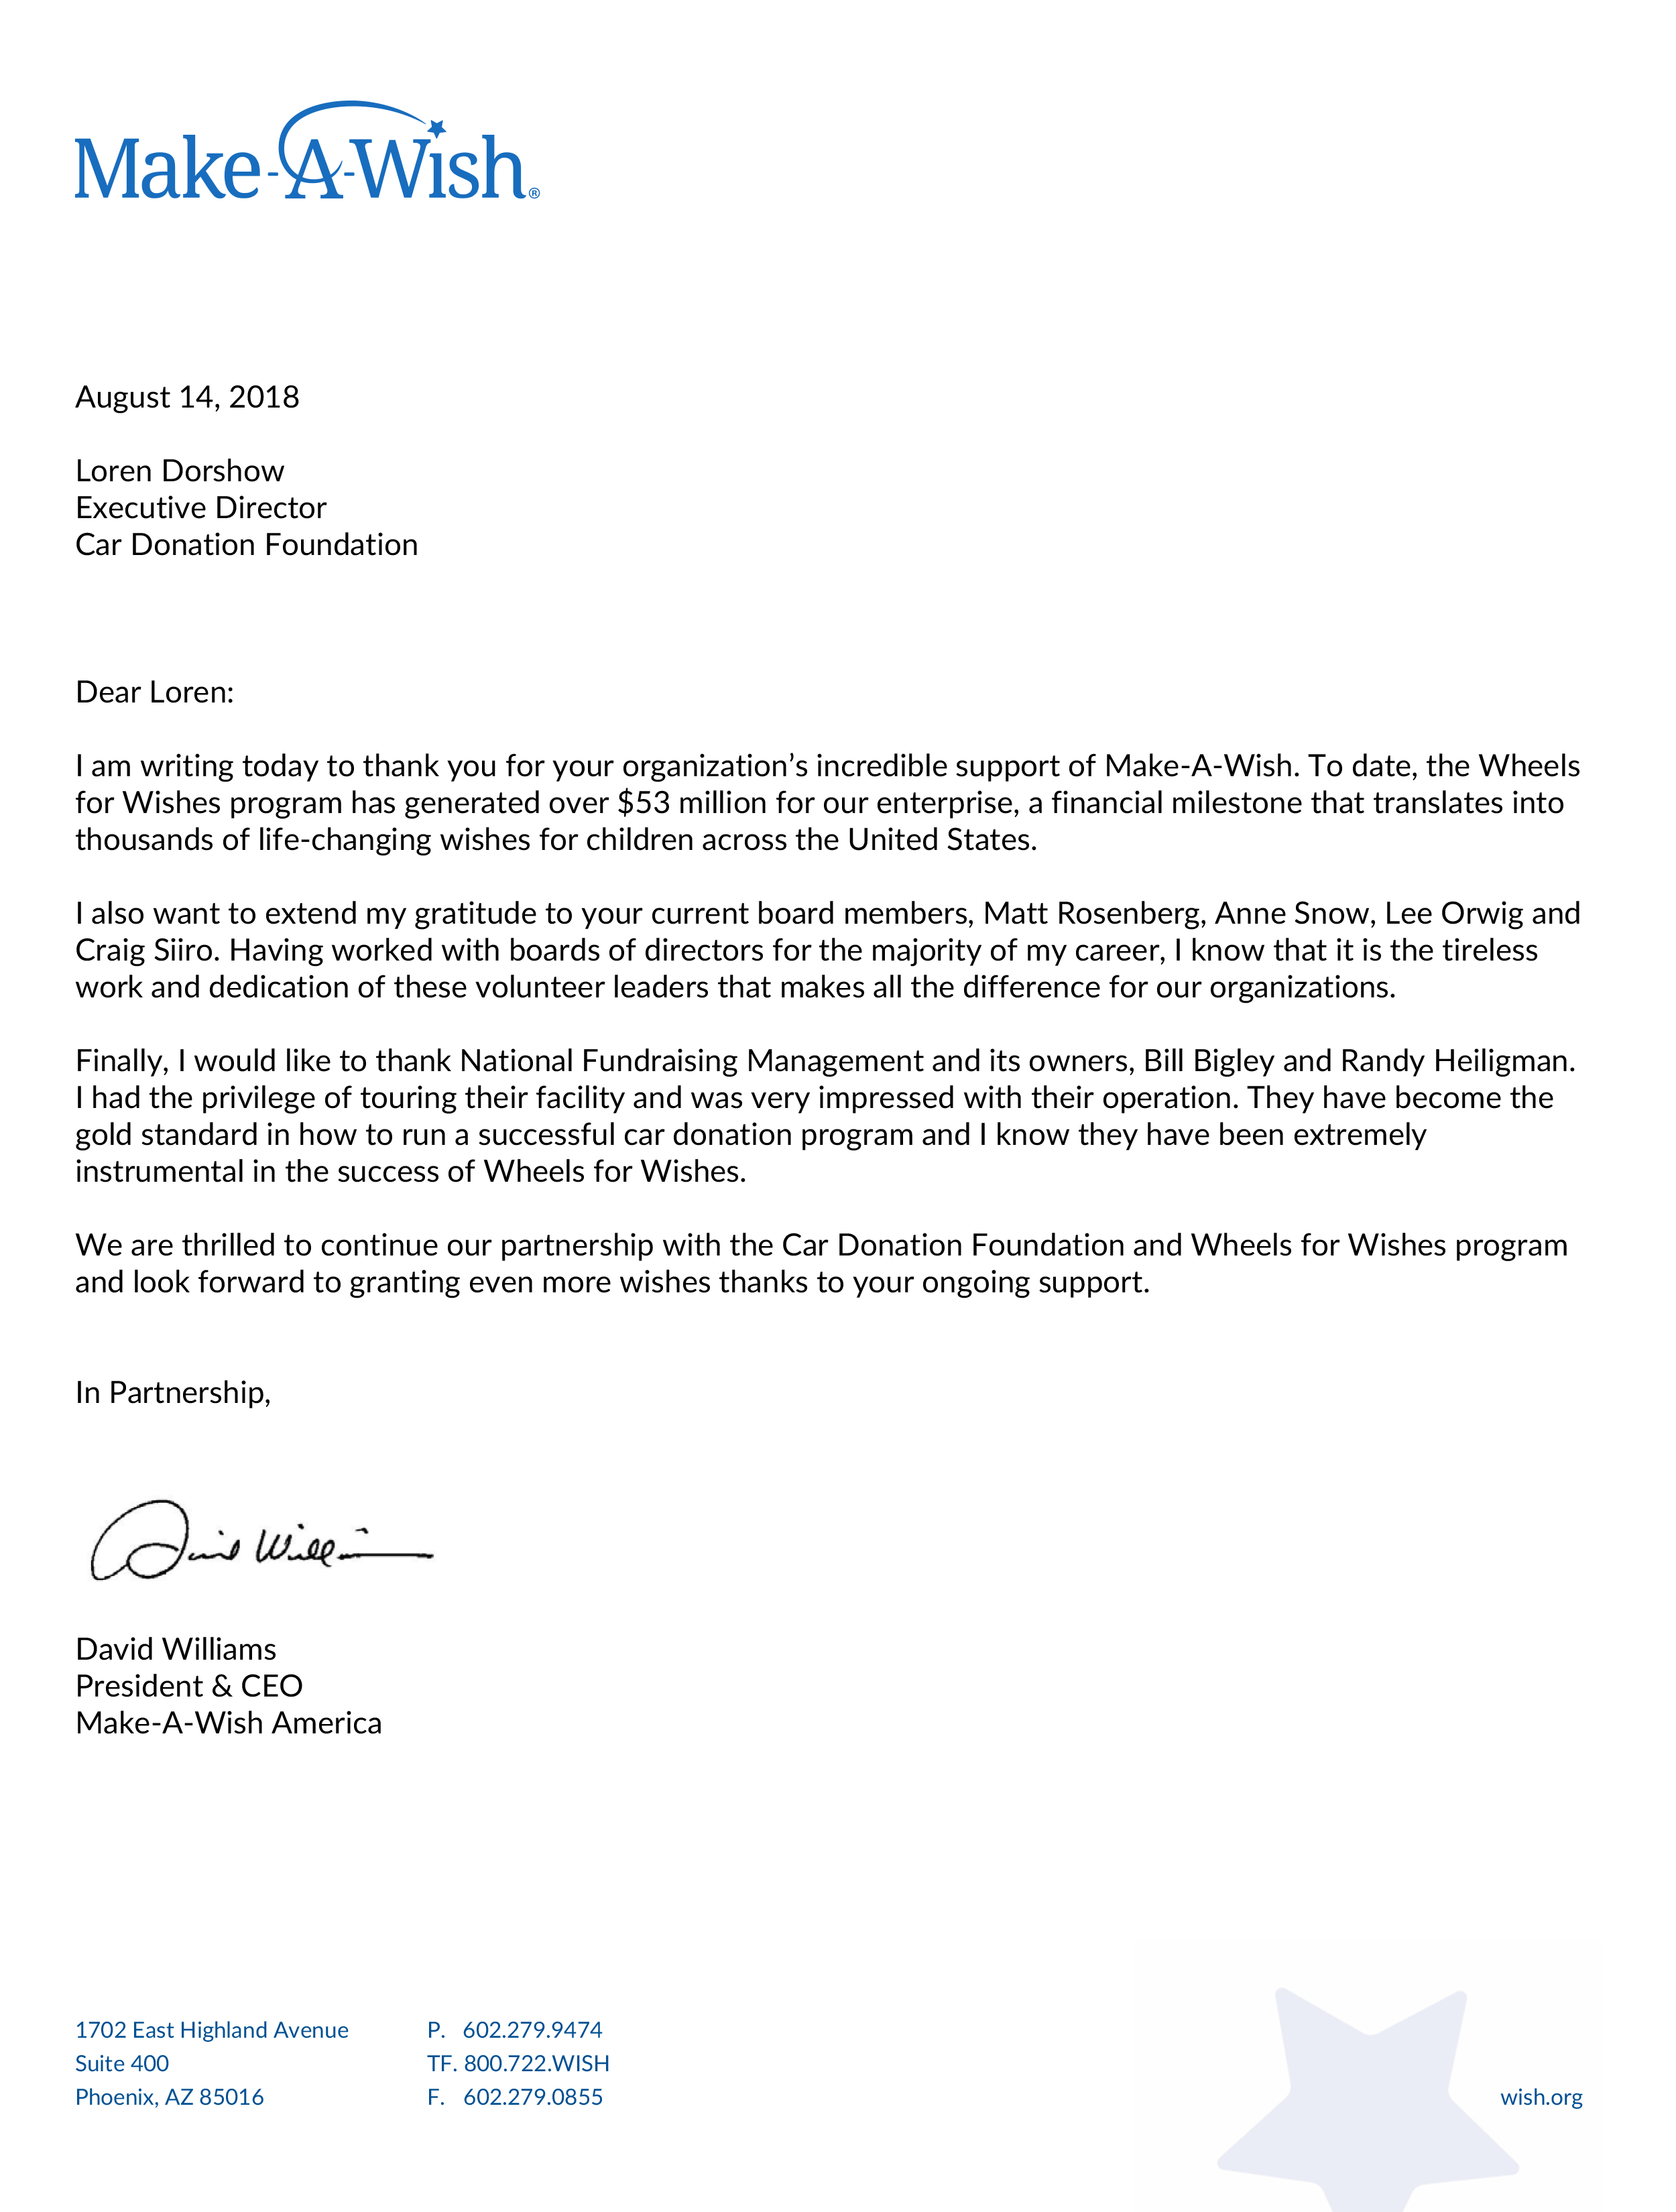 Thank You Letter To Ceo from cardonationfoundation.org